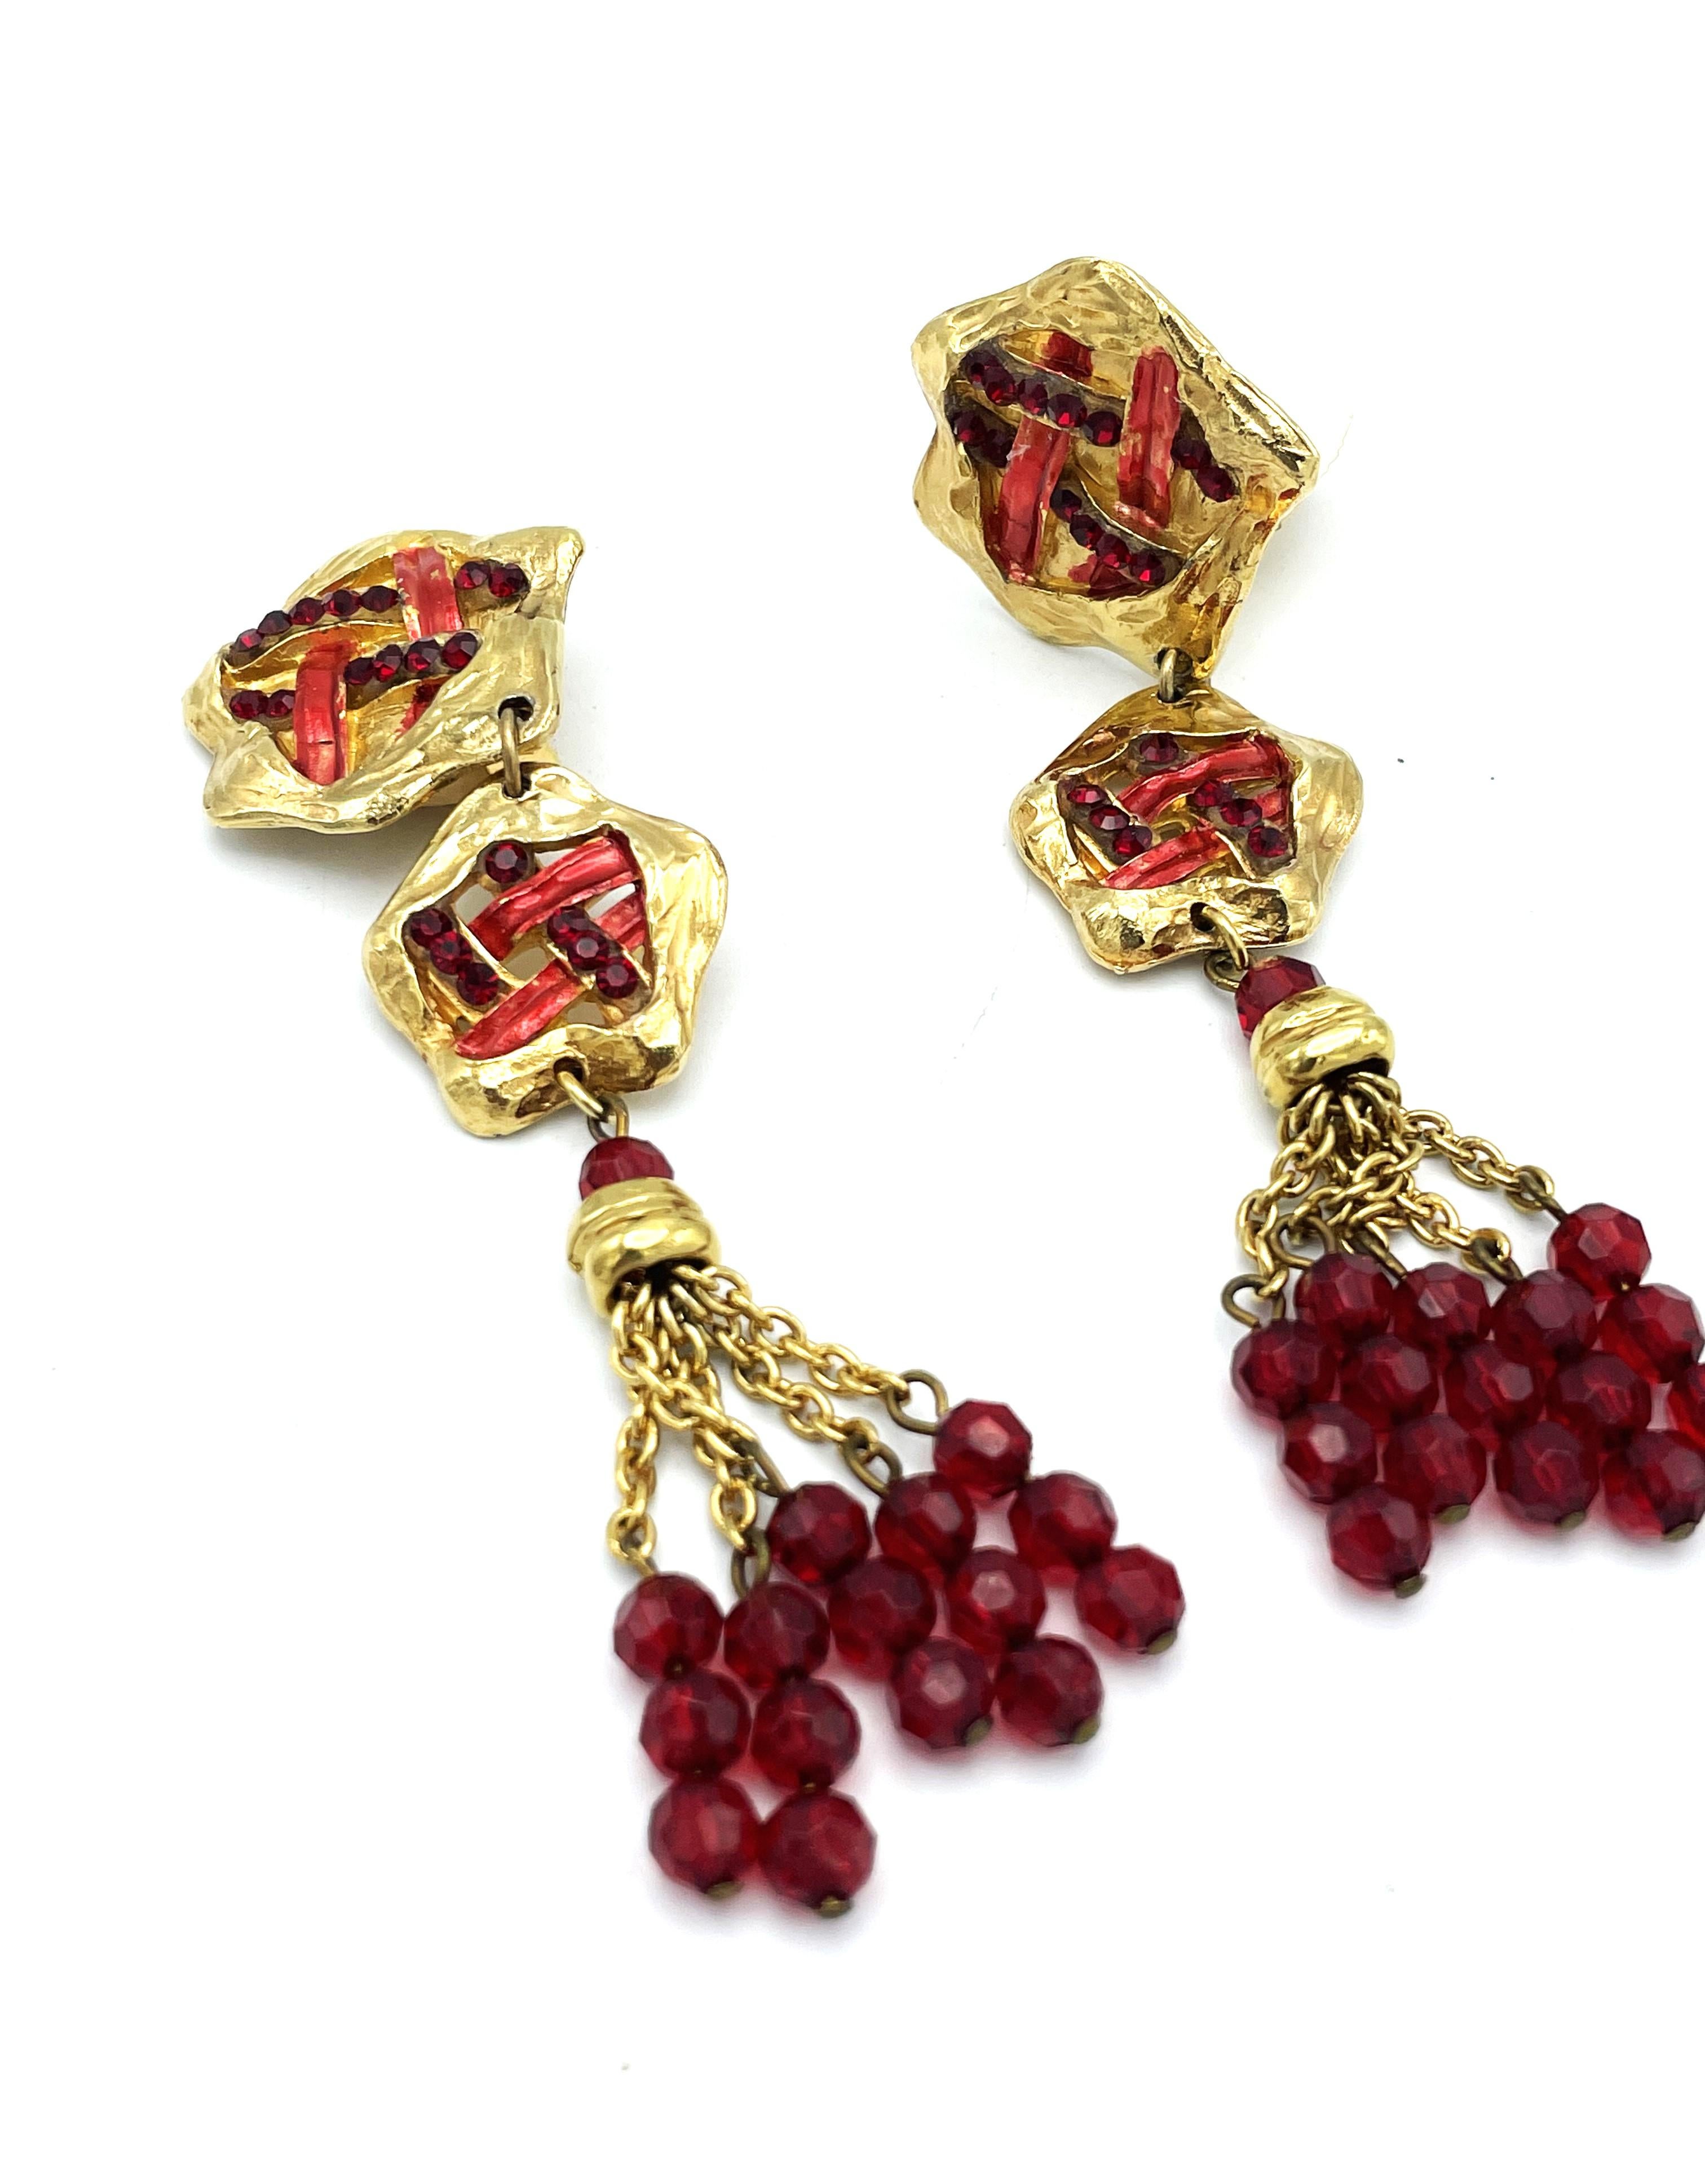 Long Clip-one earing by JACKY de G Paris, gold plated, red rhinestons For Sale 1